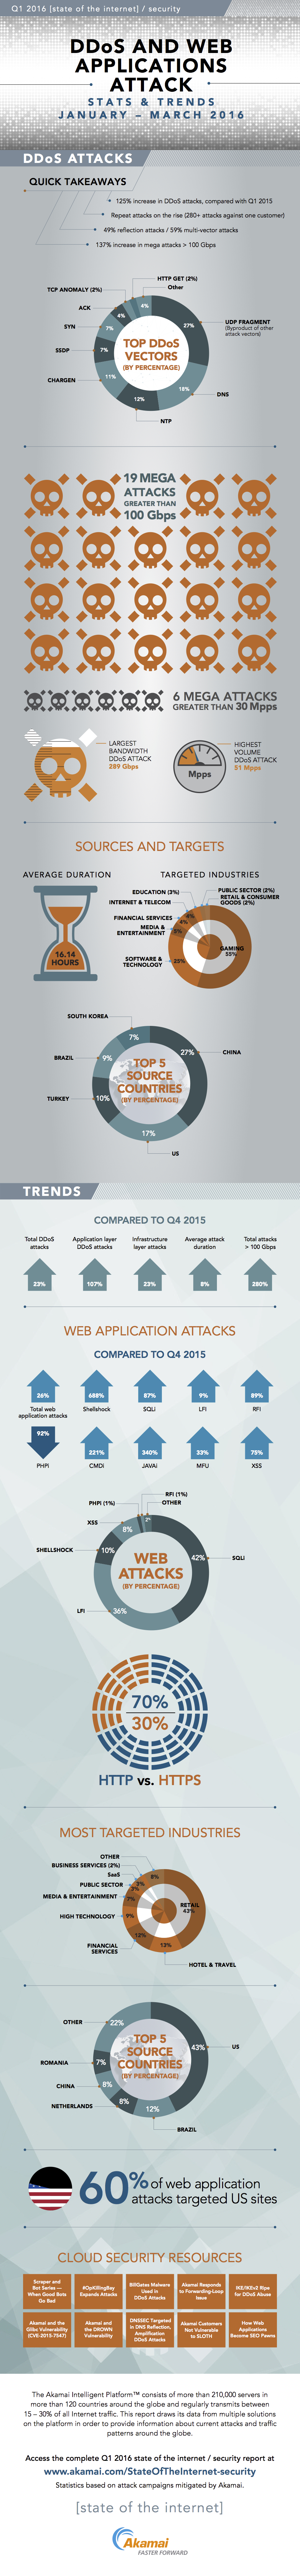 akamai-q1-2016-state-of-the-internet-security-report-infographic